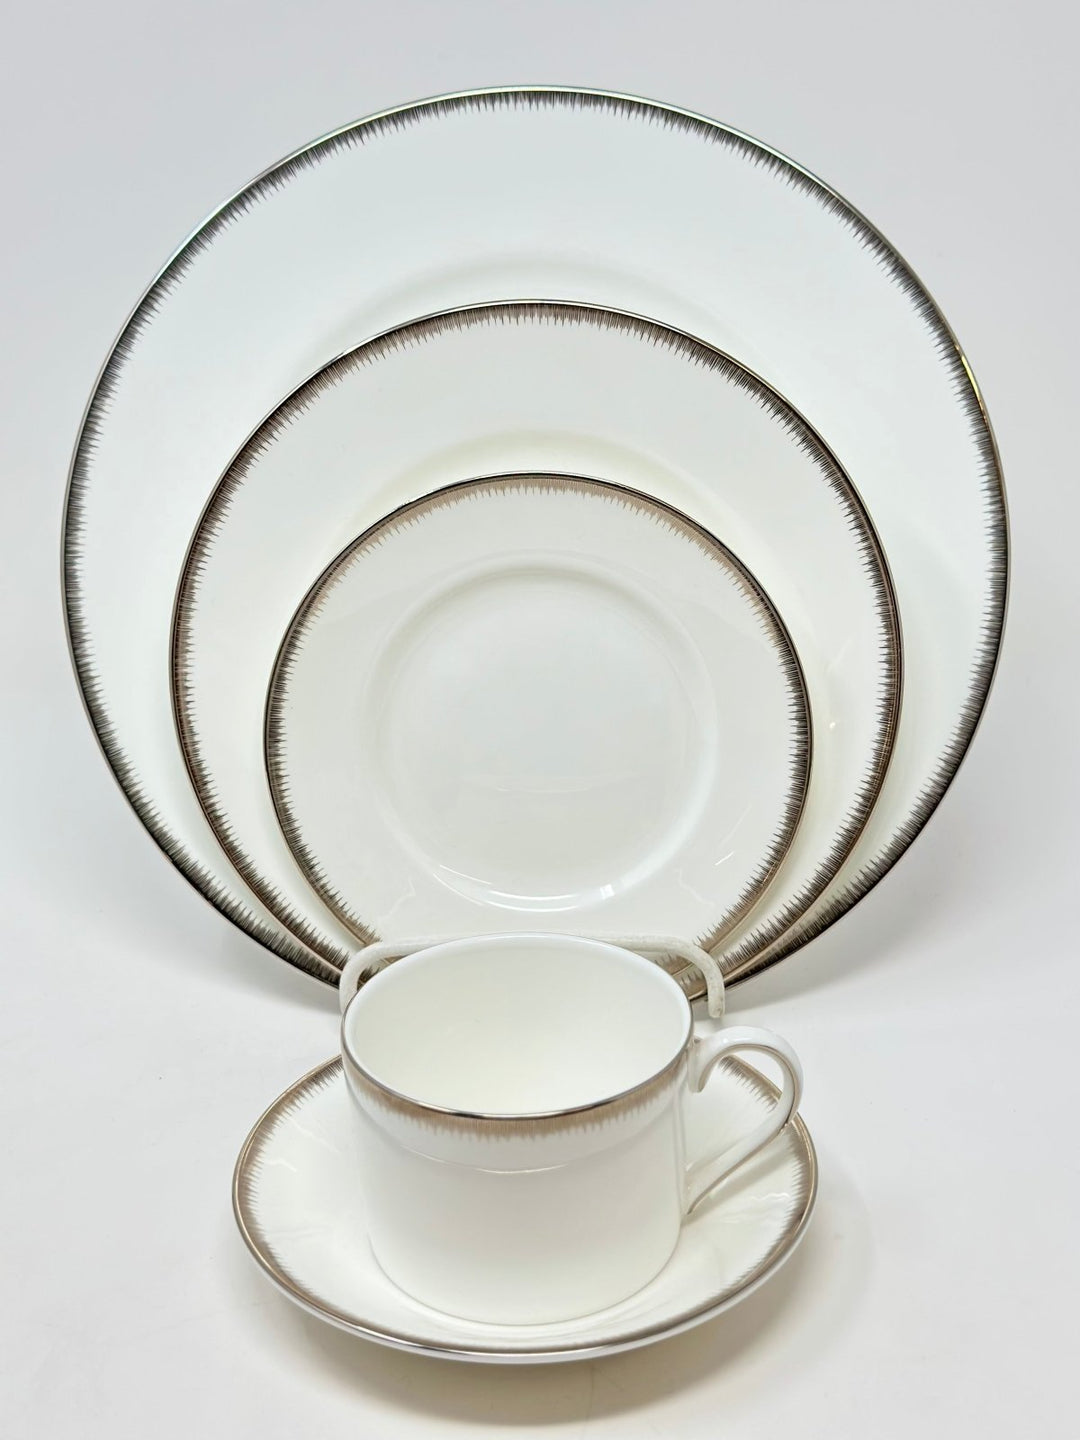 Wedgwood Silver Aster - 5 Piece Place Settings - Kitchen Smart